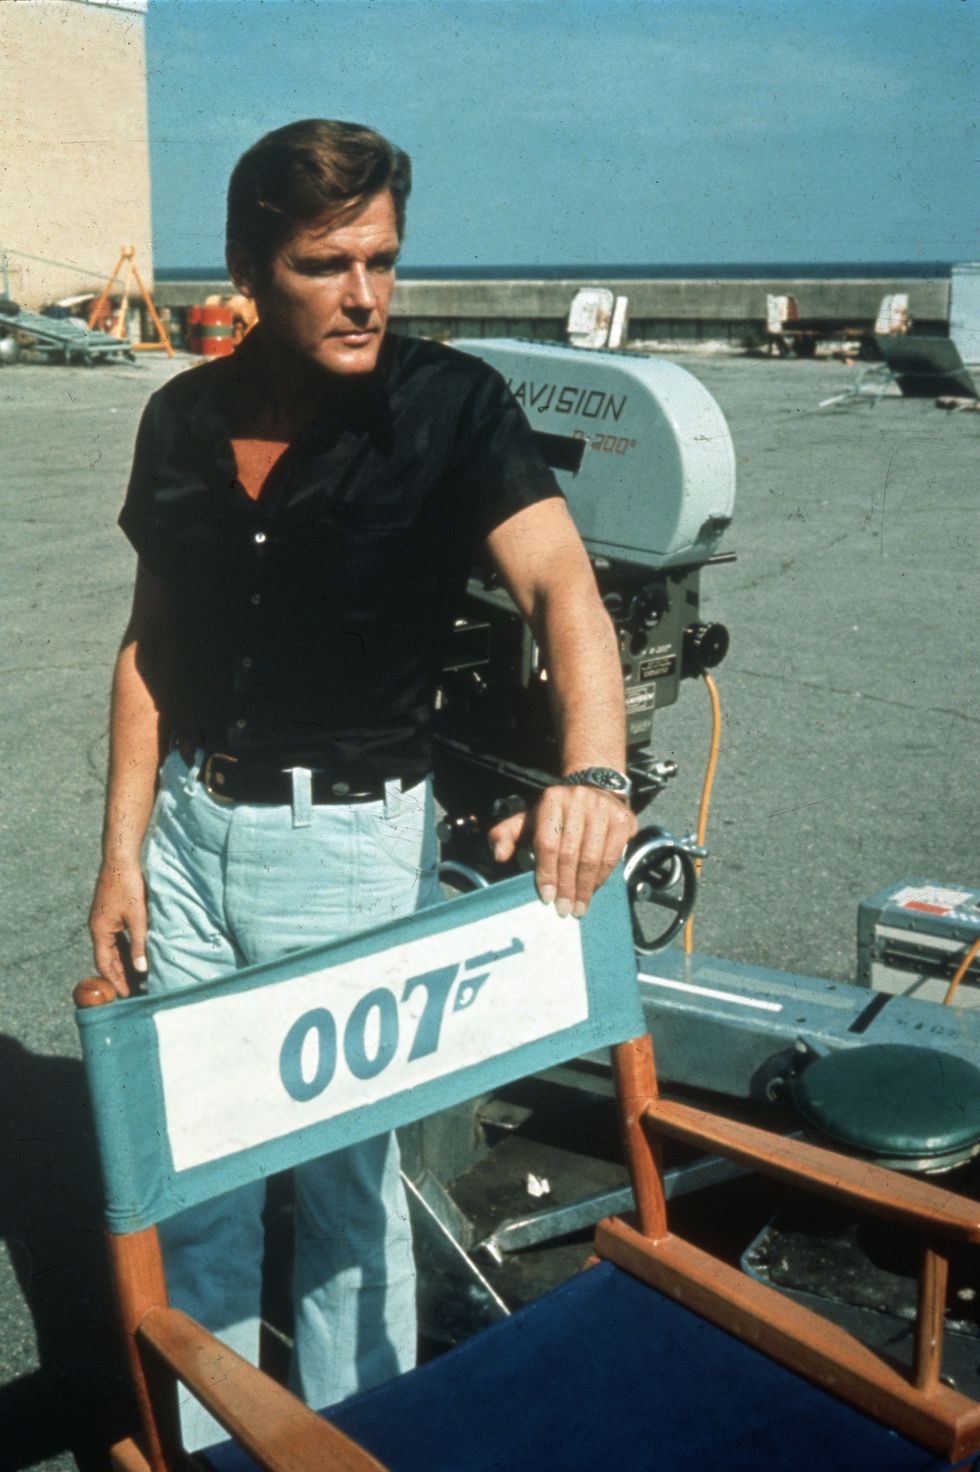 1973  english film and television actor roger moore on location for the filming of the james bond 007 movie live and let die  photo by hulton archivegetty images